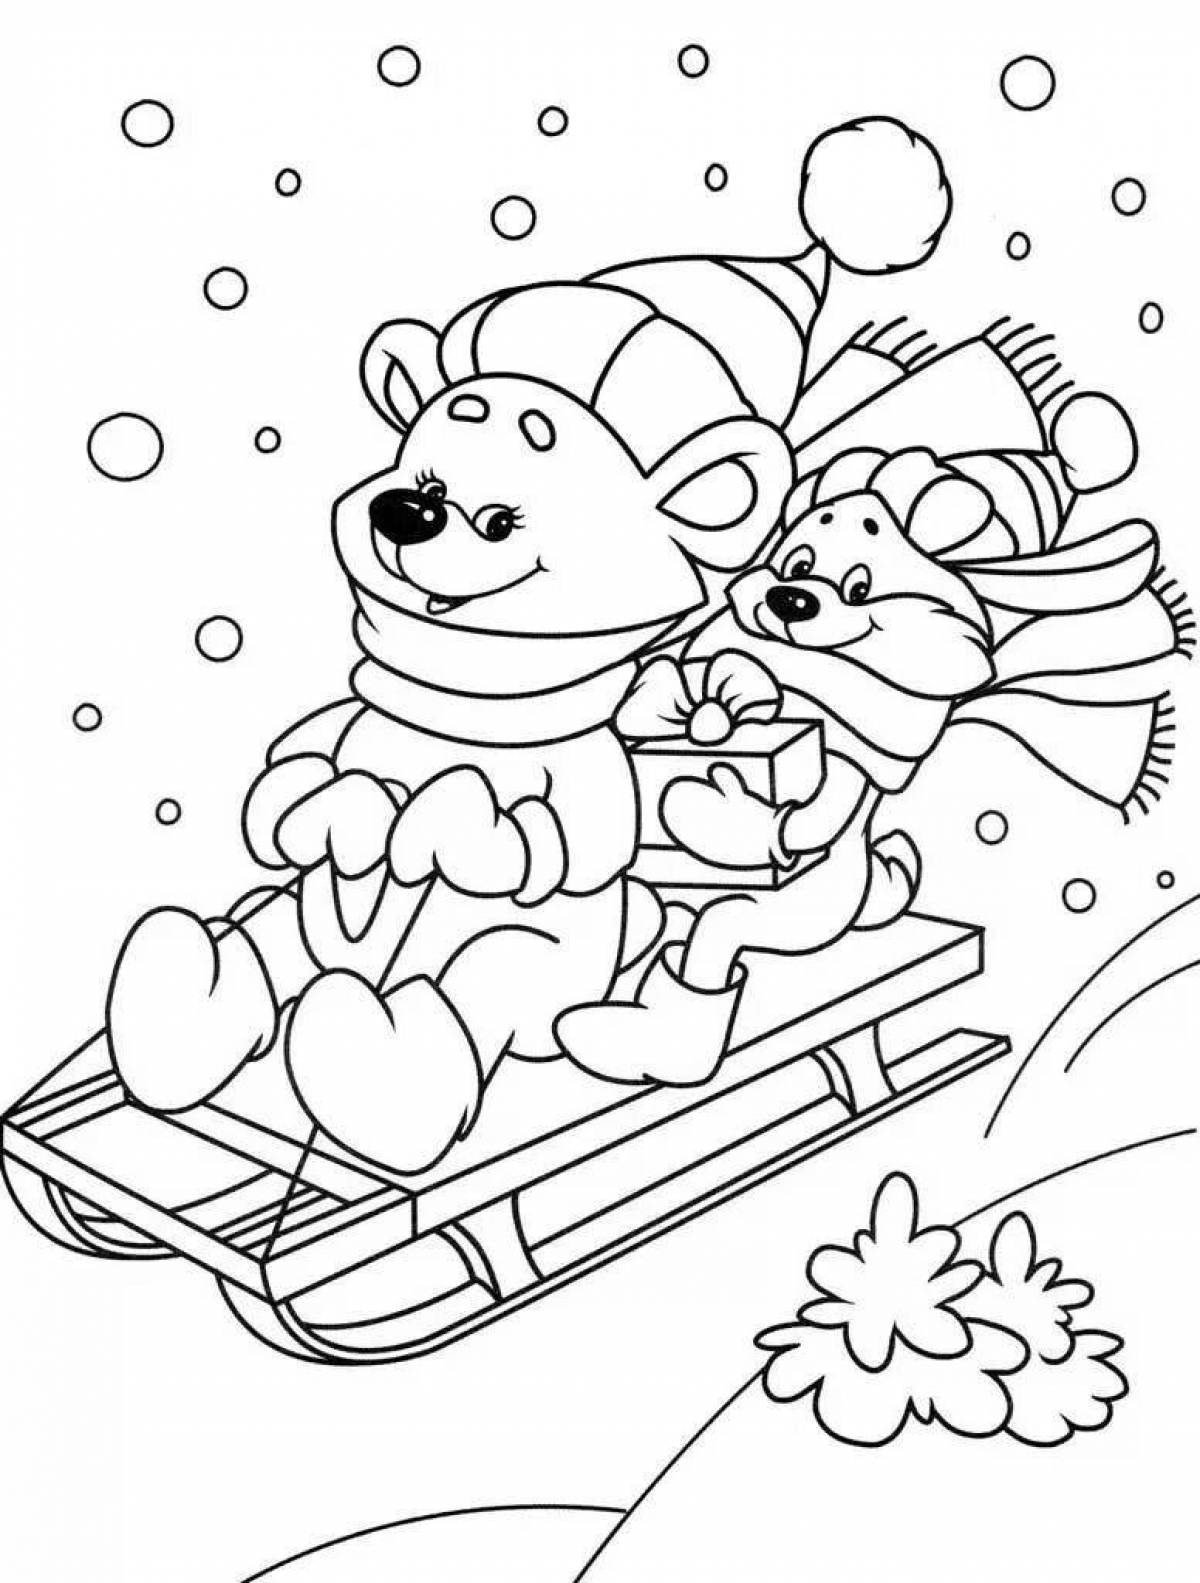 Fun coloring book winter for children 2-3 years old